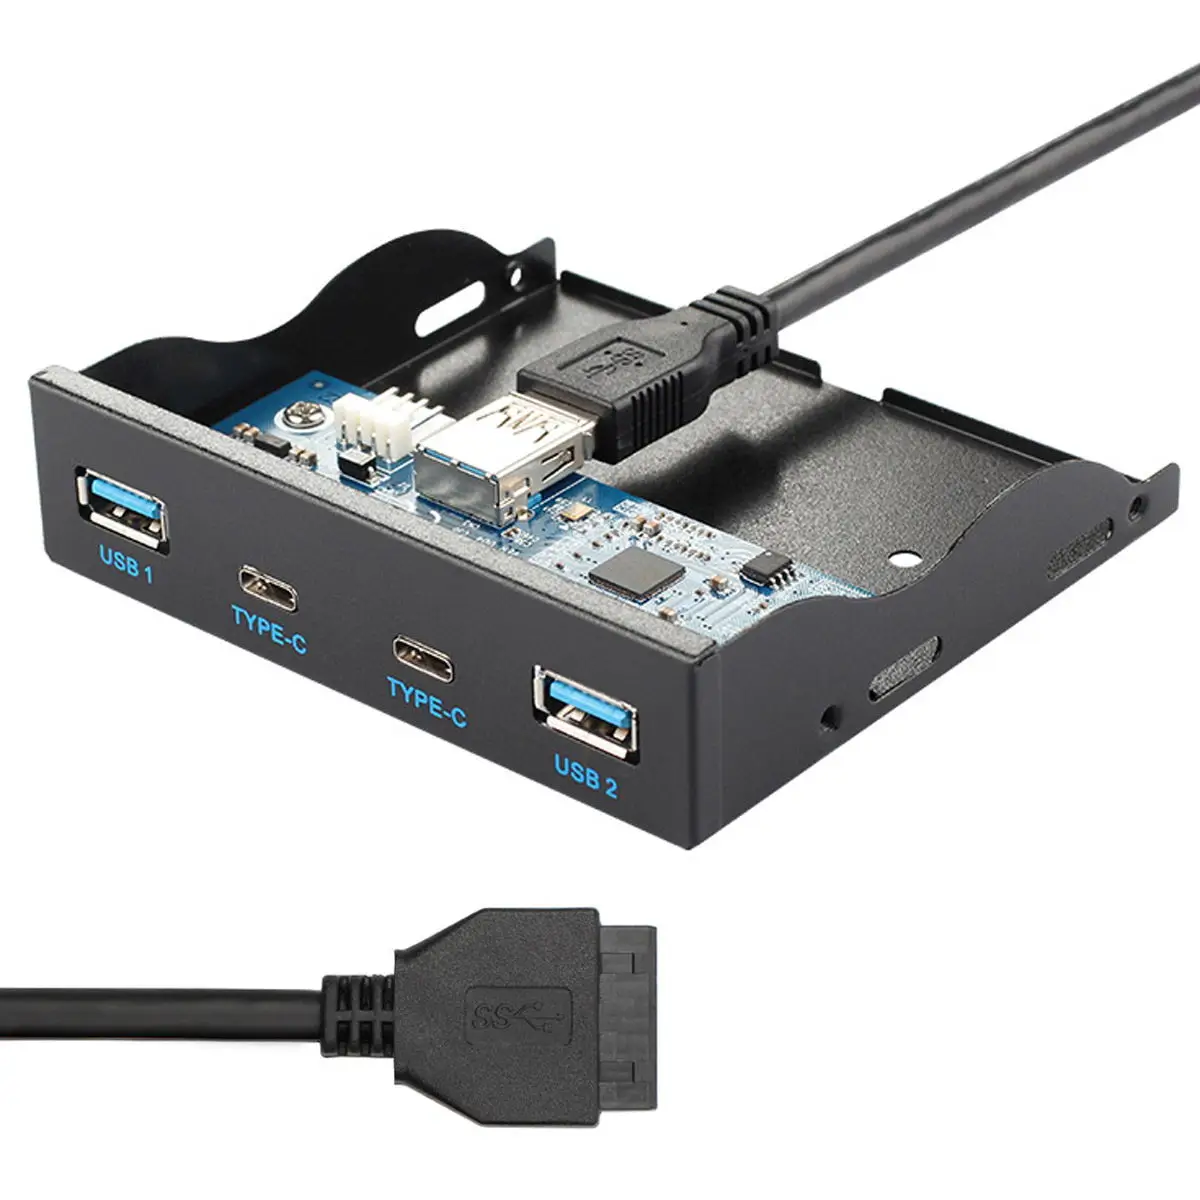 

CY Xiwai USB-C & USB 3.0 HUB 4 Ports Front Panel to Motherboard 20Pin Connector Cable for 3.5" Floppy Bay